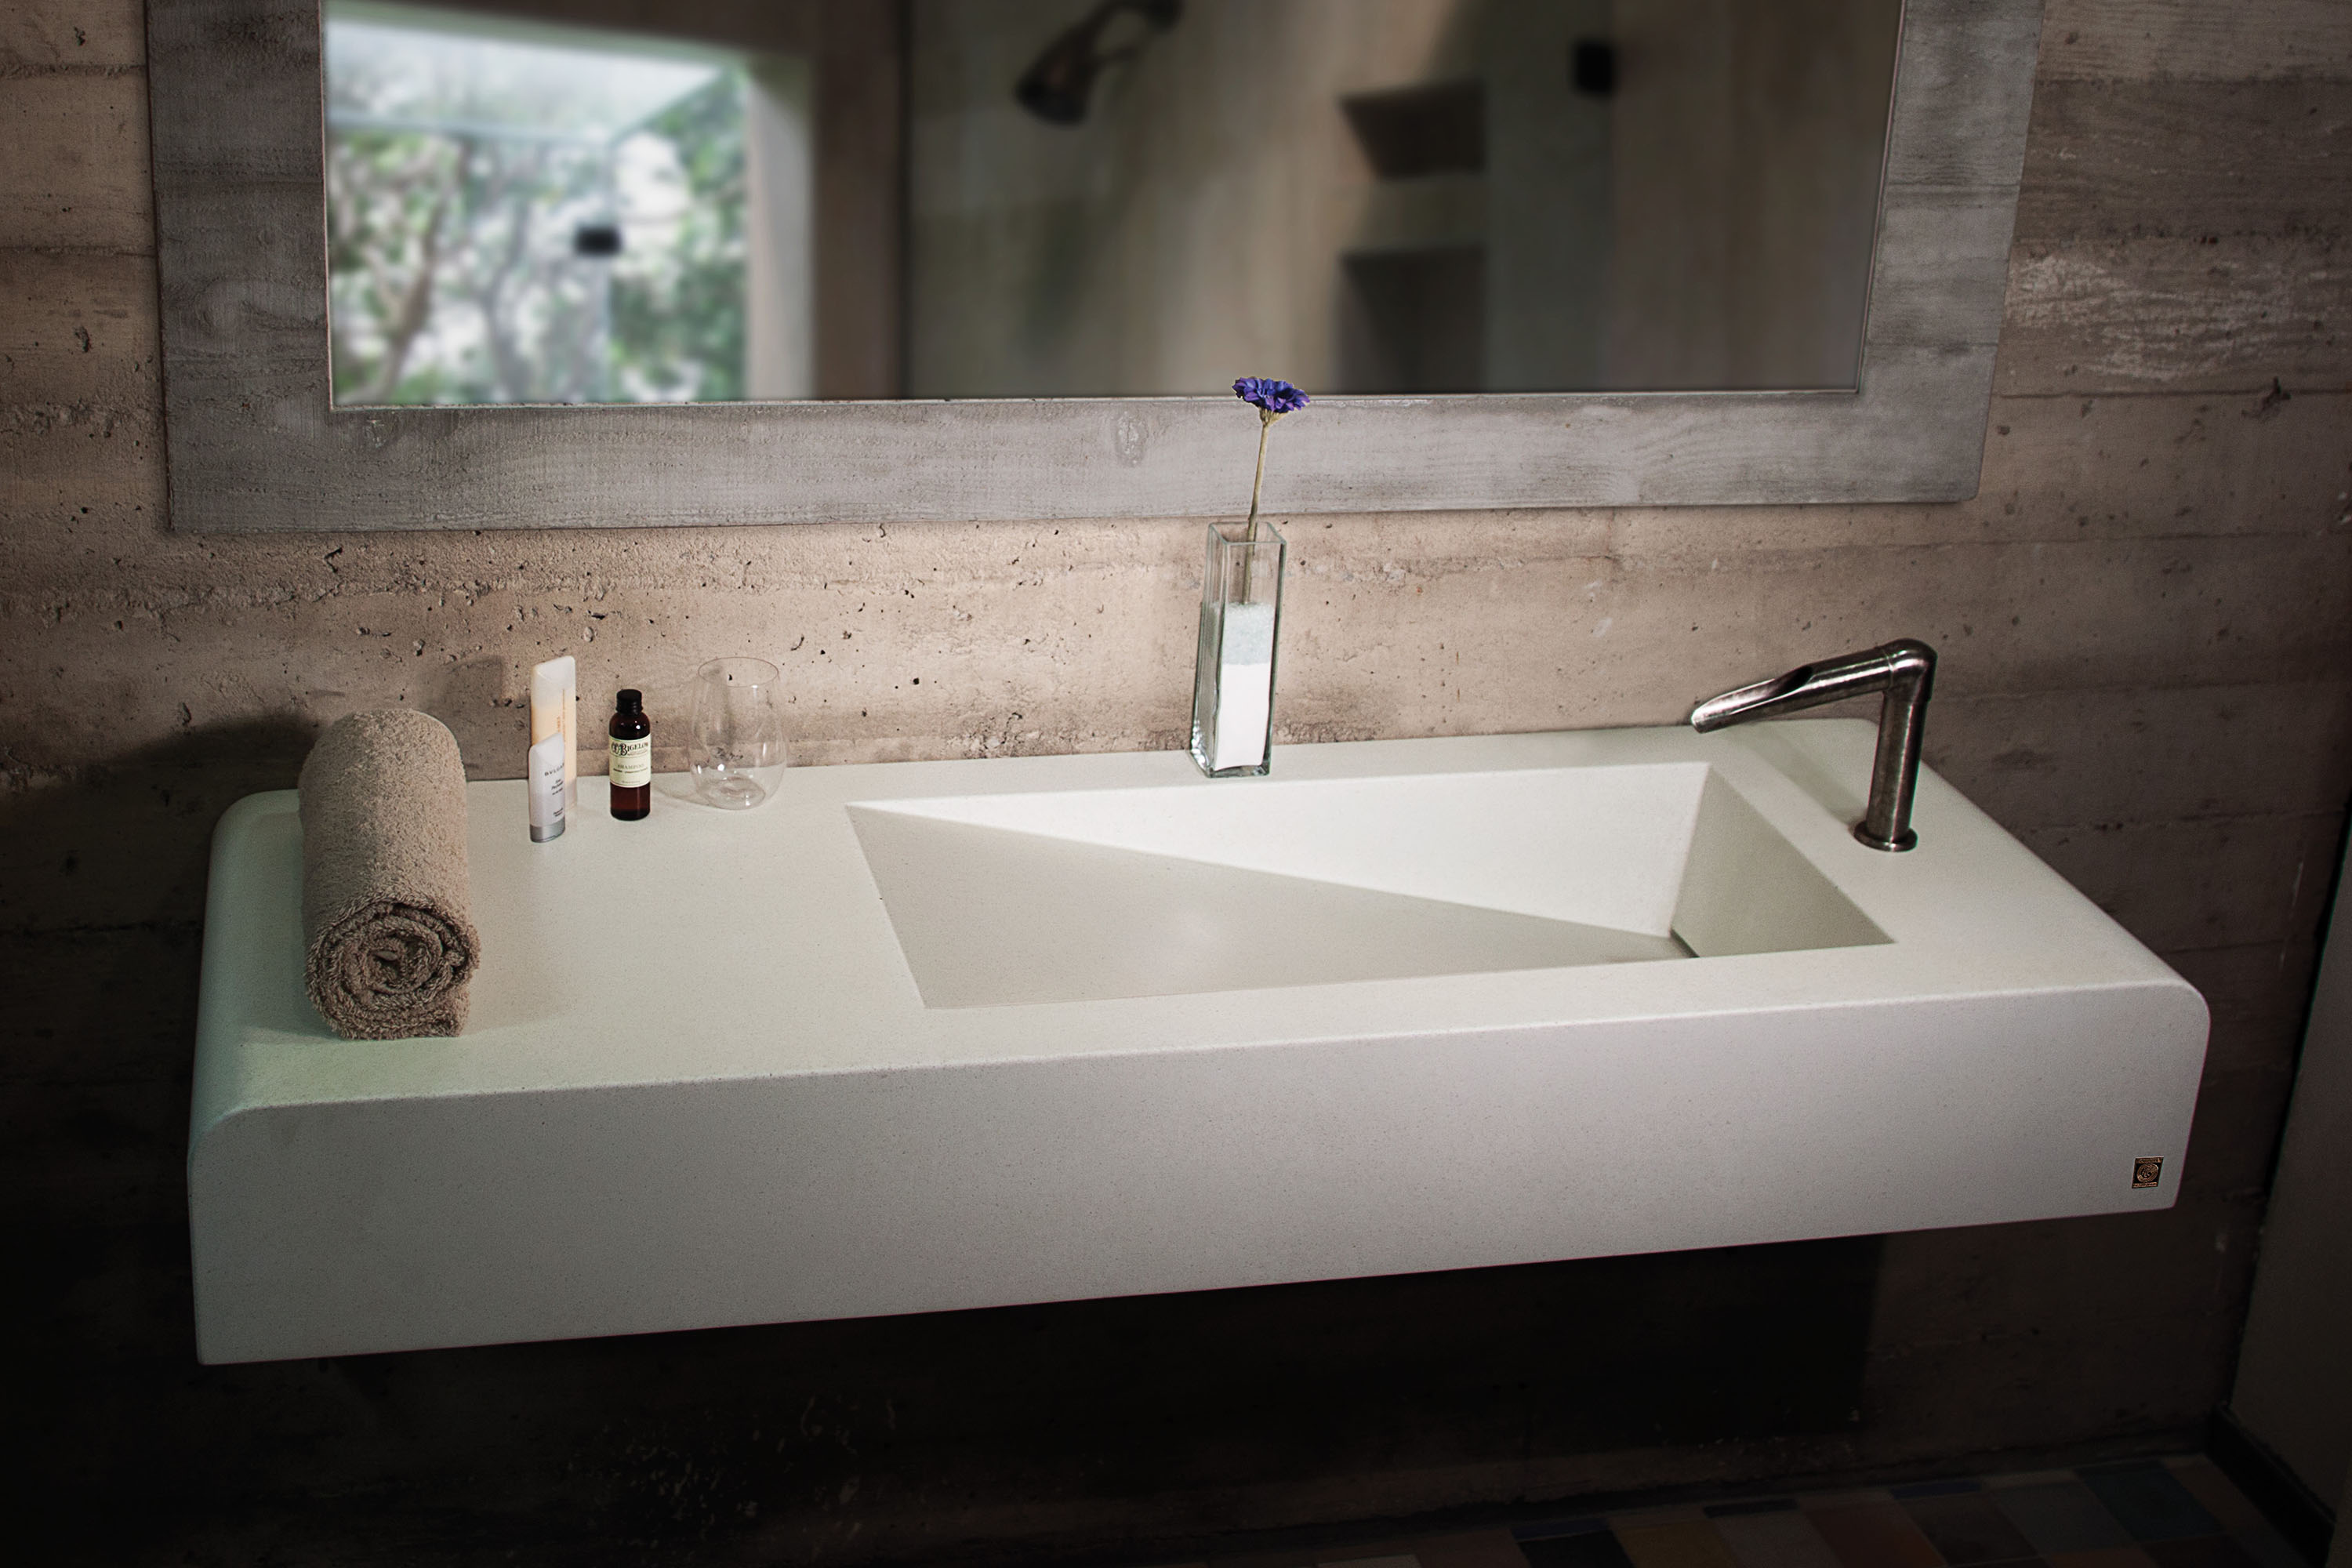 Concrete RampSink by Sonoma Cast Stone with SansHands Faucet by Sonoma Forge, N604 Alabaster